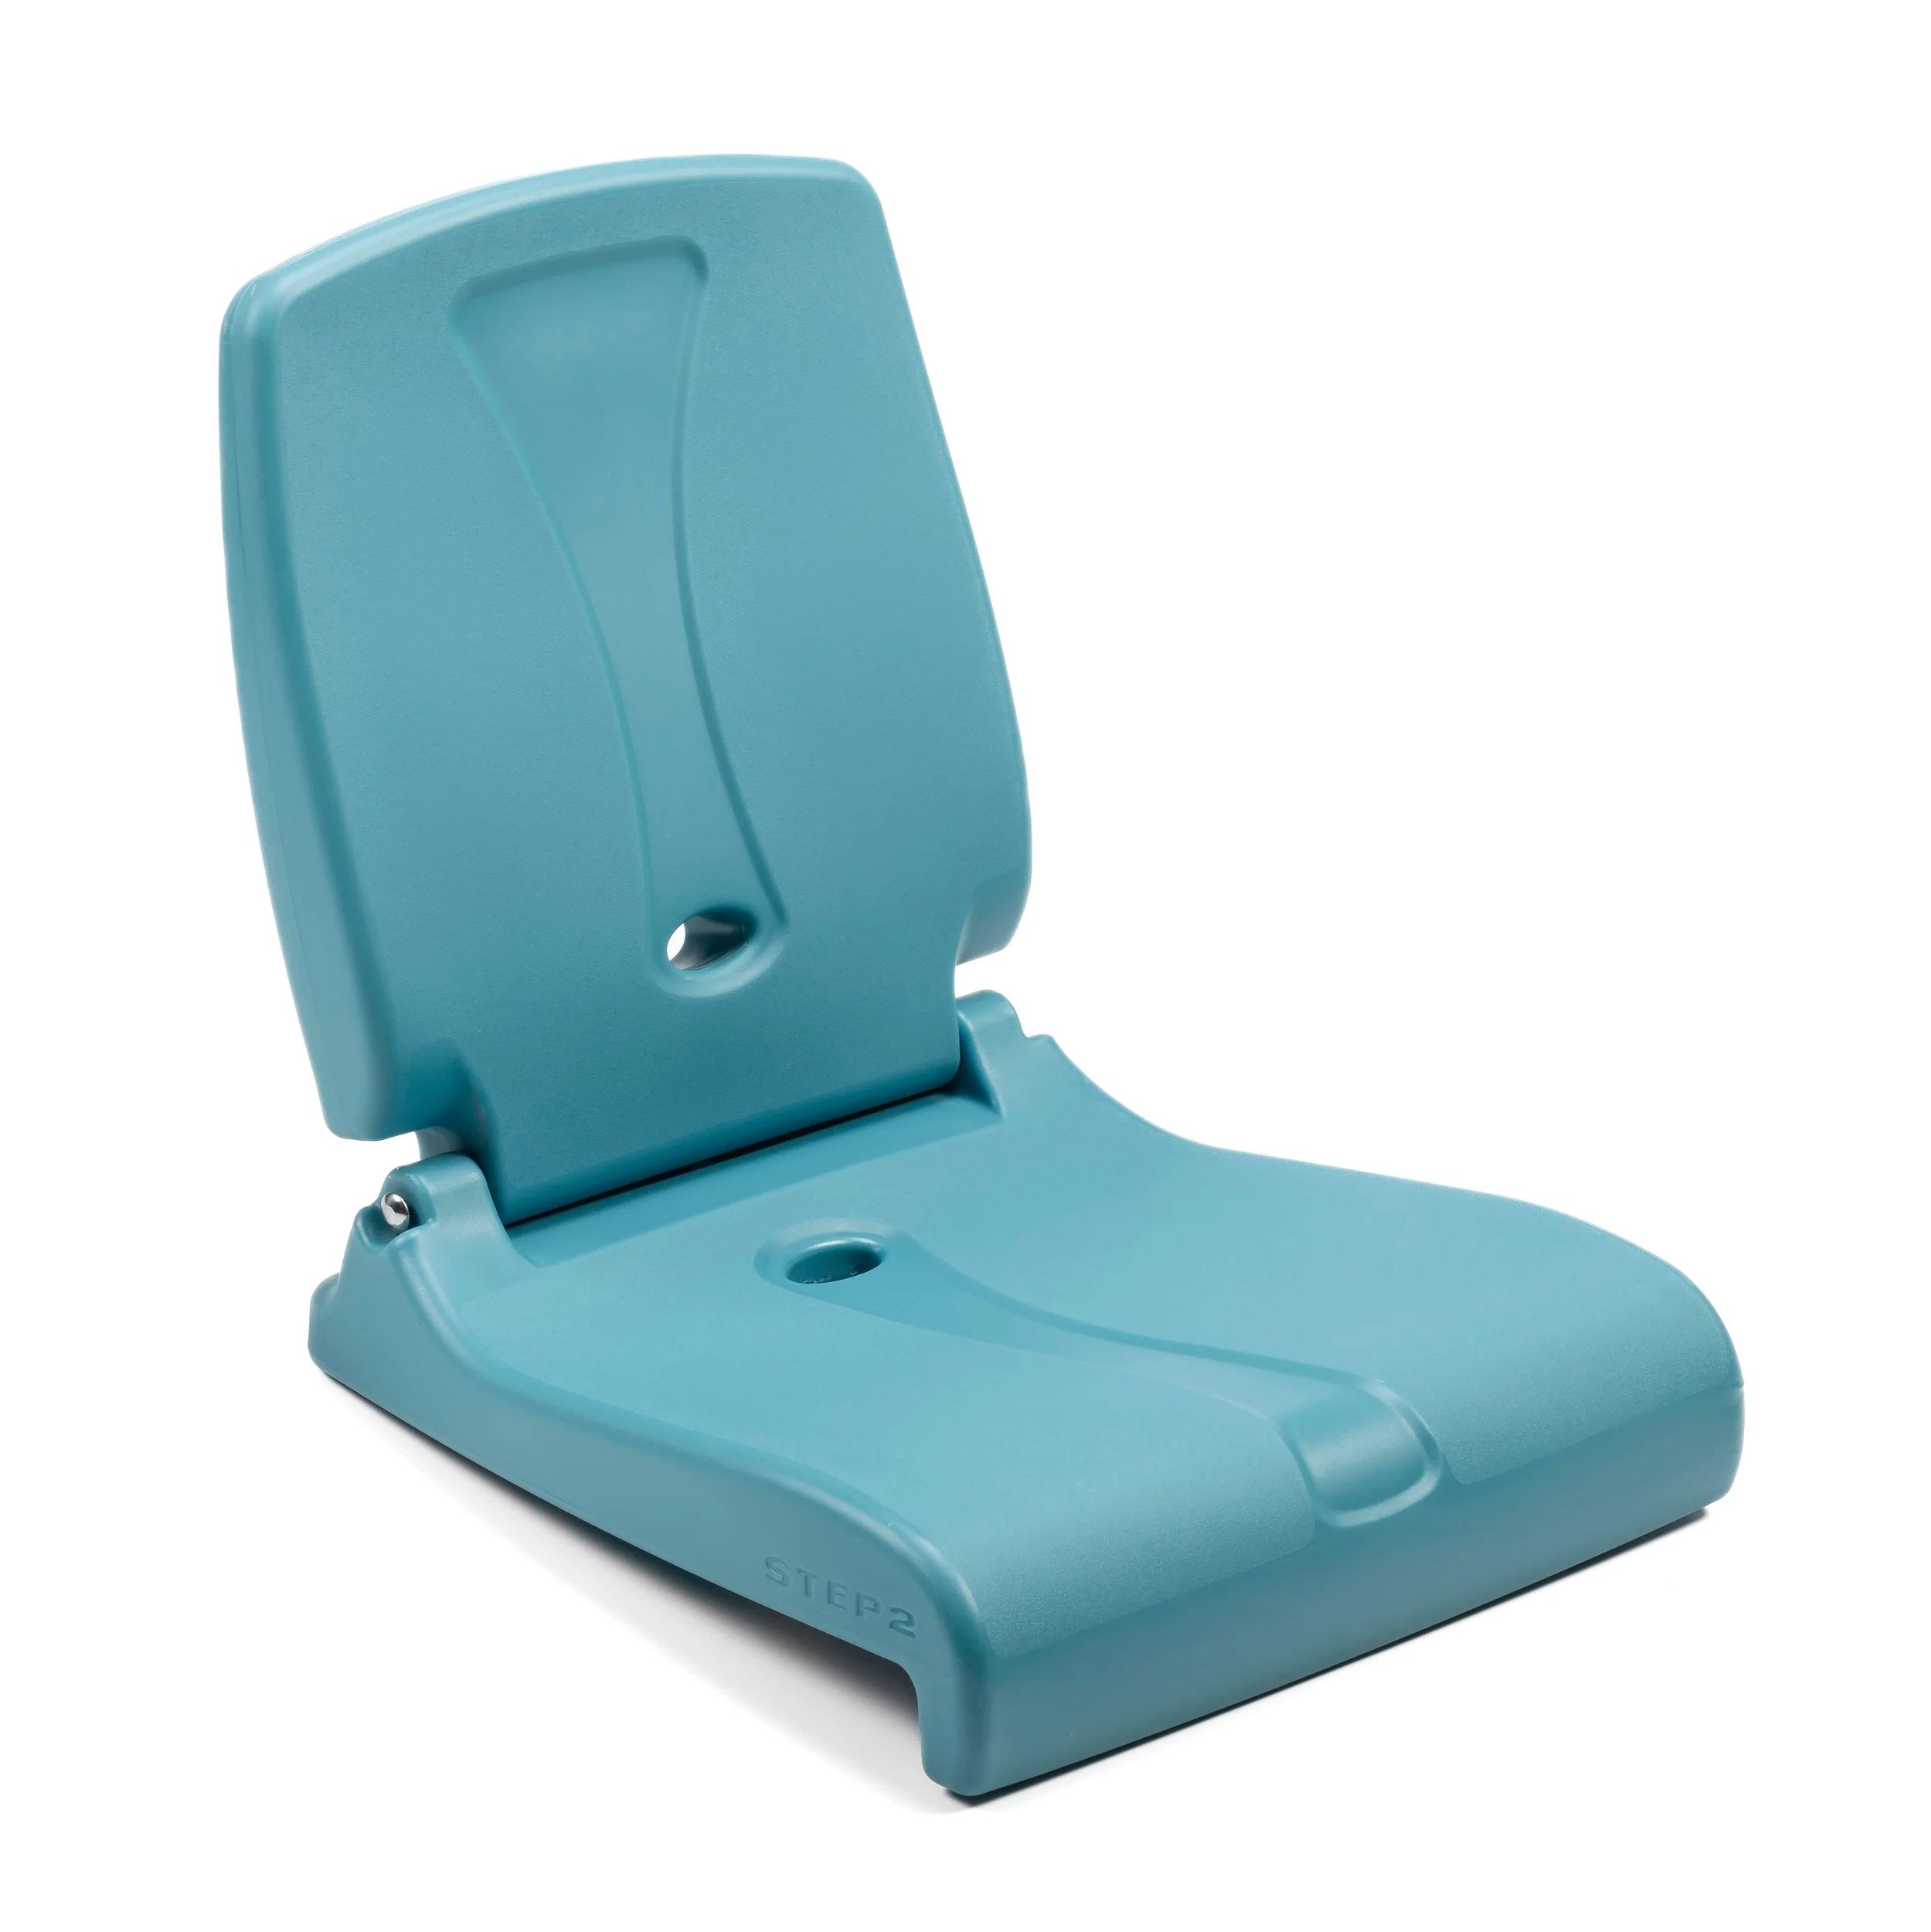 Step2 Flip Seat Capri Pool Chair Portable Foldable Seat with Back Support | Walmart (US)